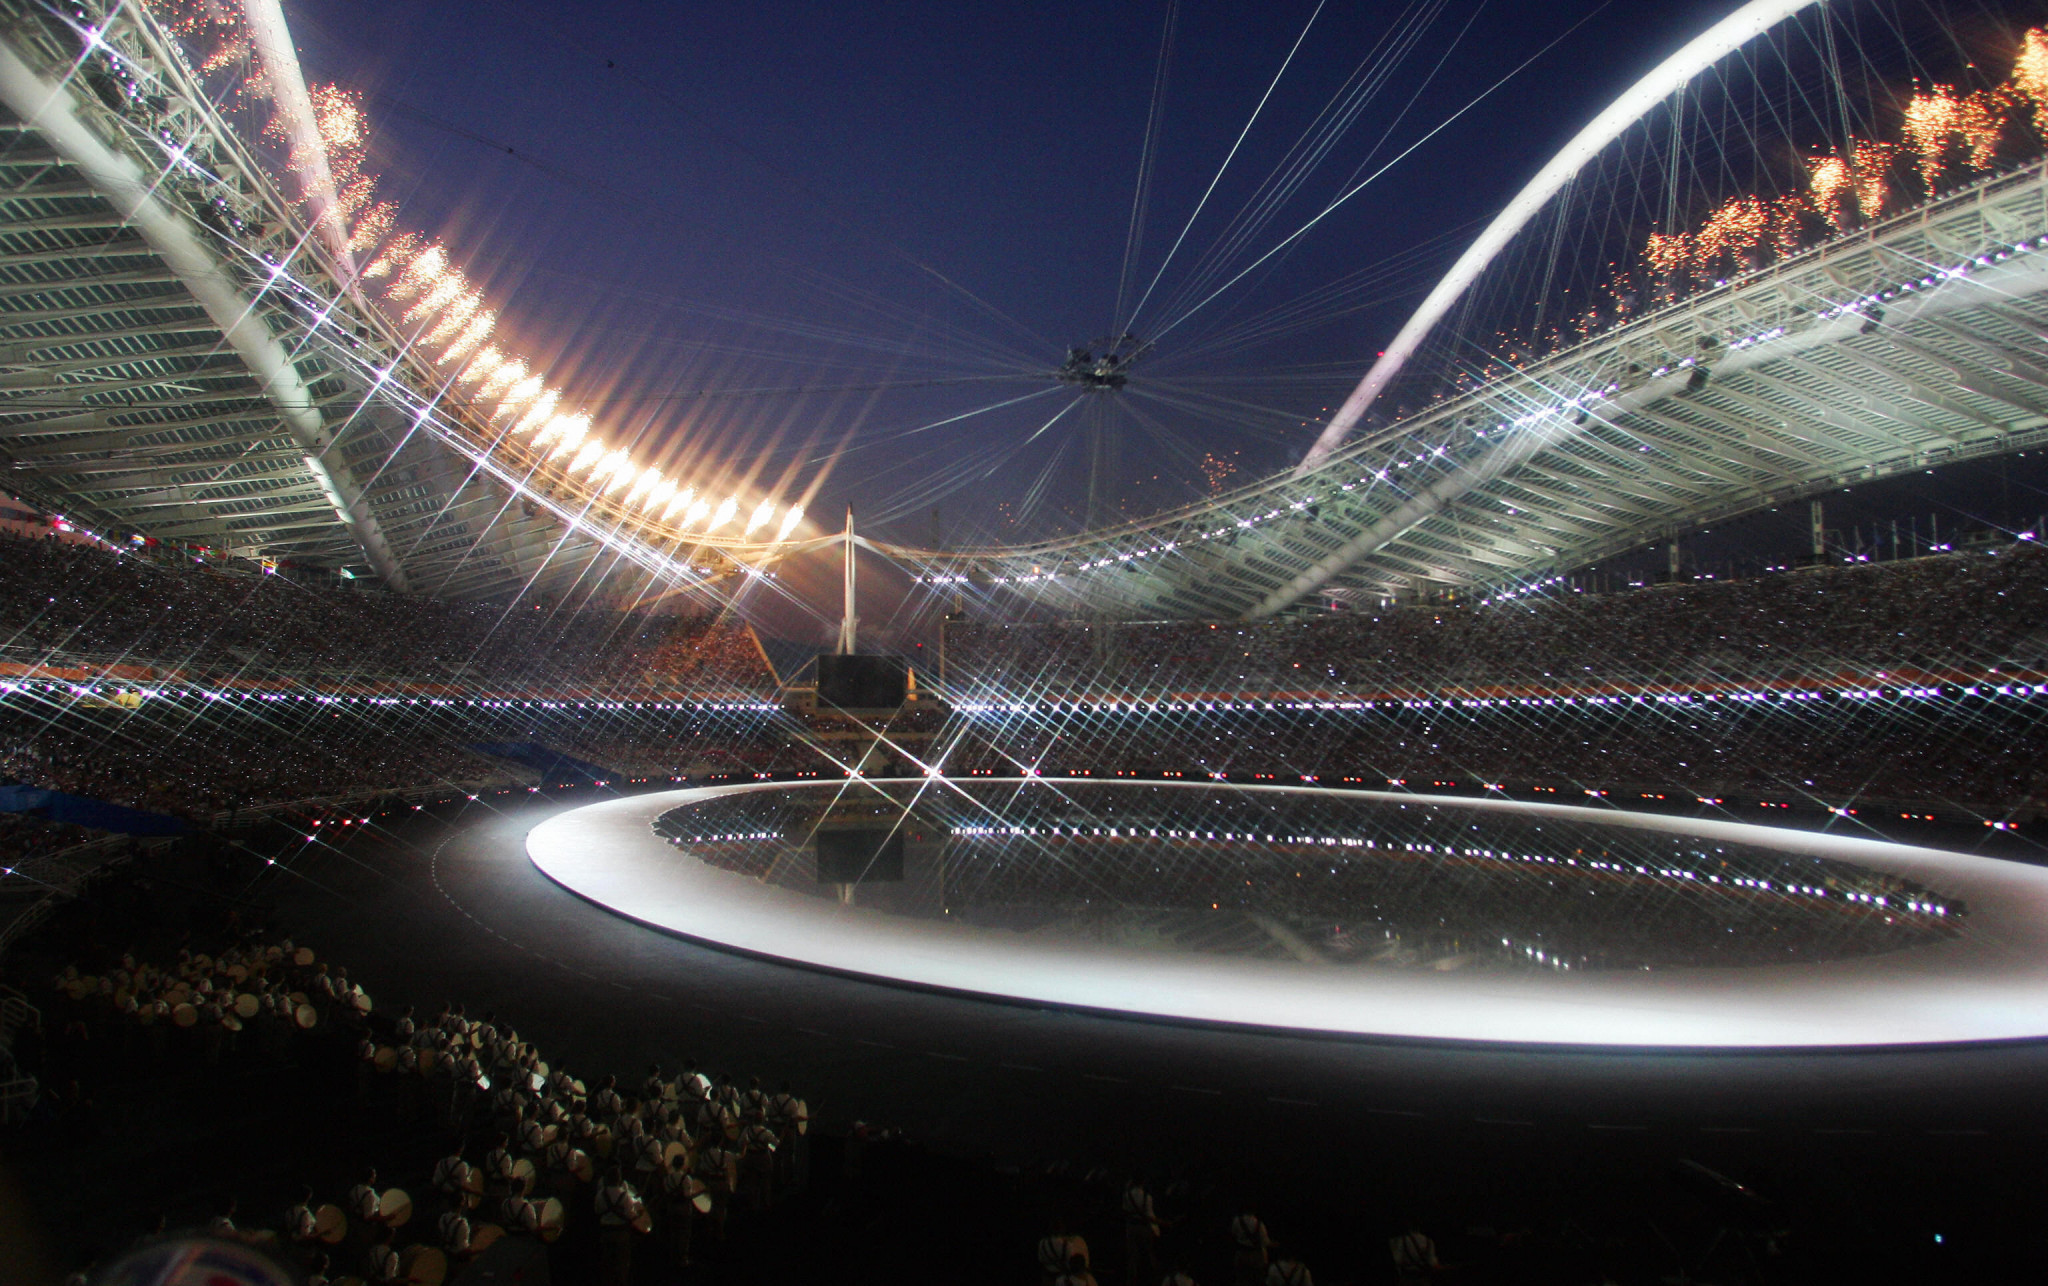 Athens 2004 Olympic Stadium closed due to concerns over roof safety